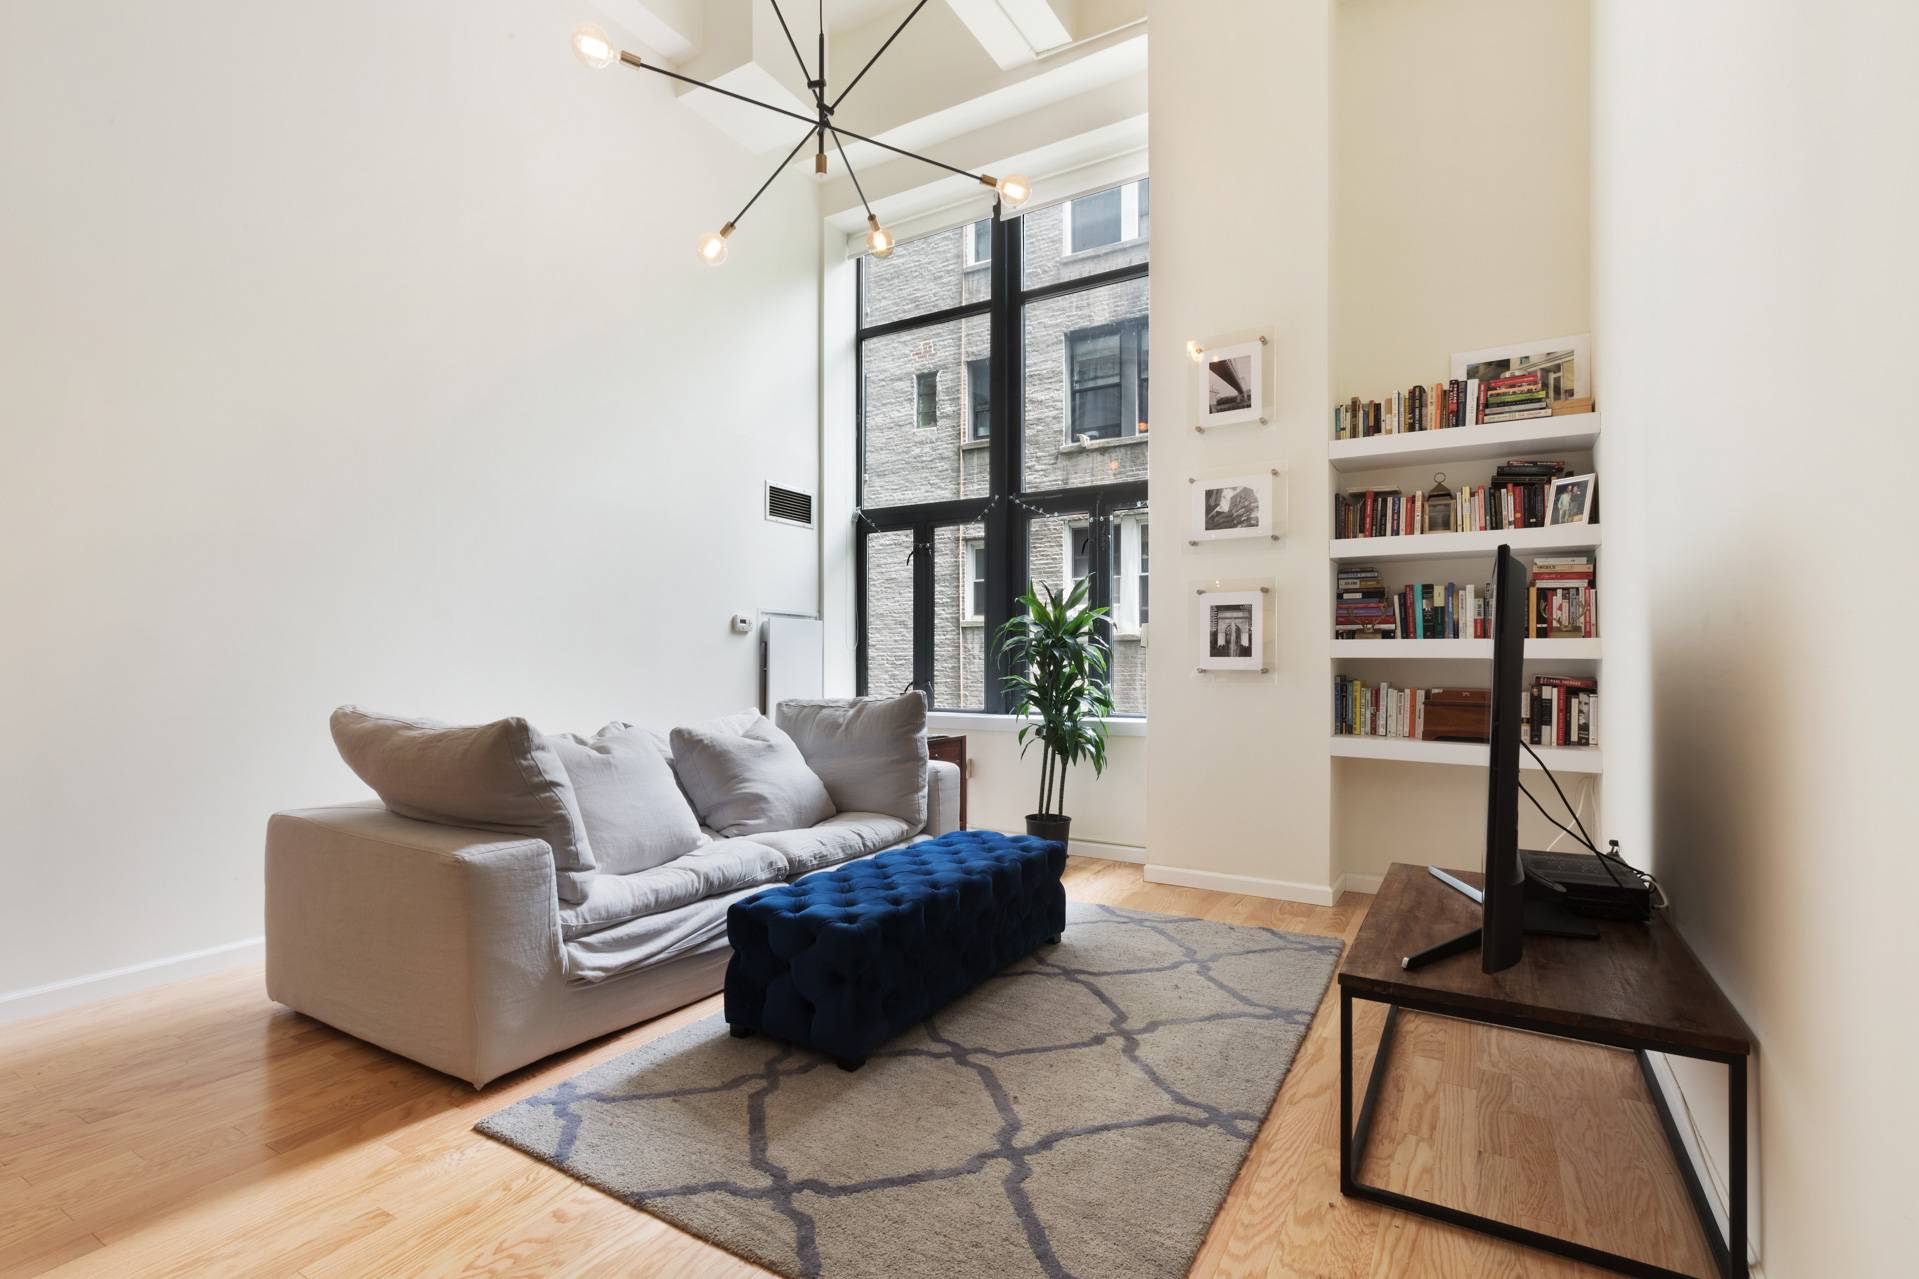 Upper West Side, The Pythian, Sun-Soaked LOFT, 1BR/1.5BA, 18.5FT Ceilings, Pre-War Cathedral Beams!